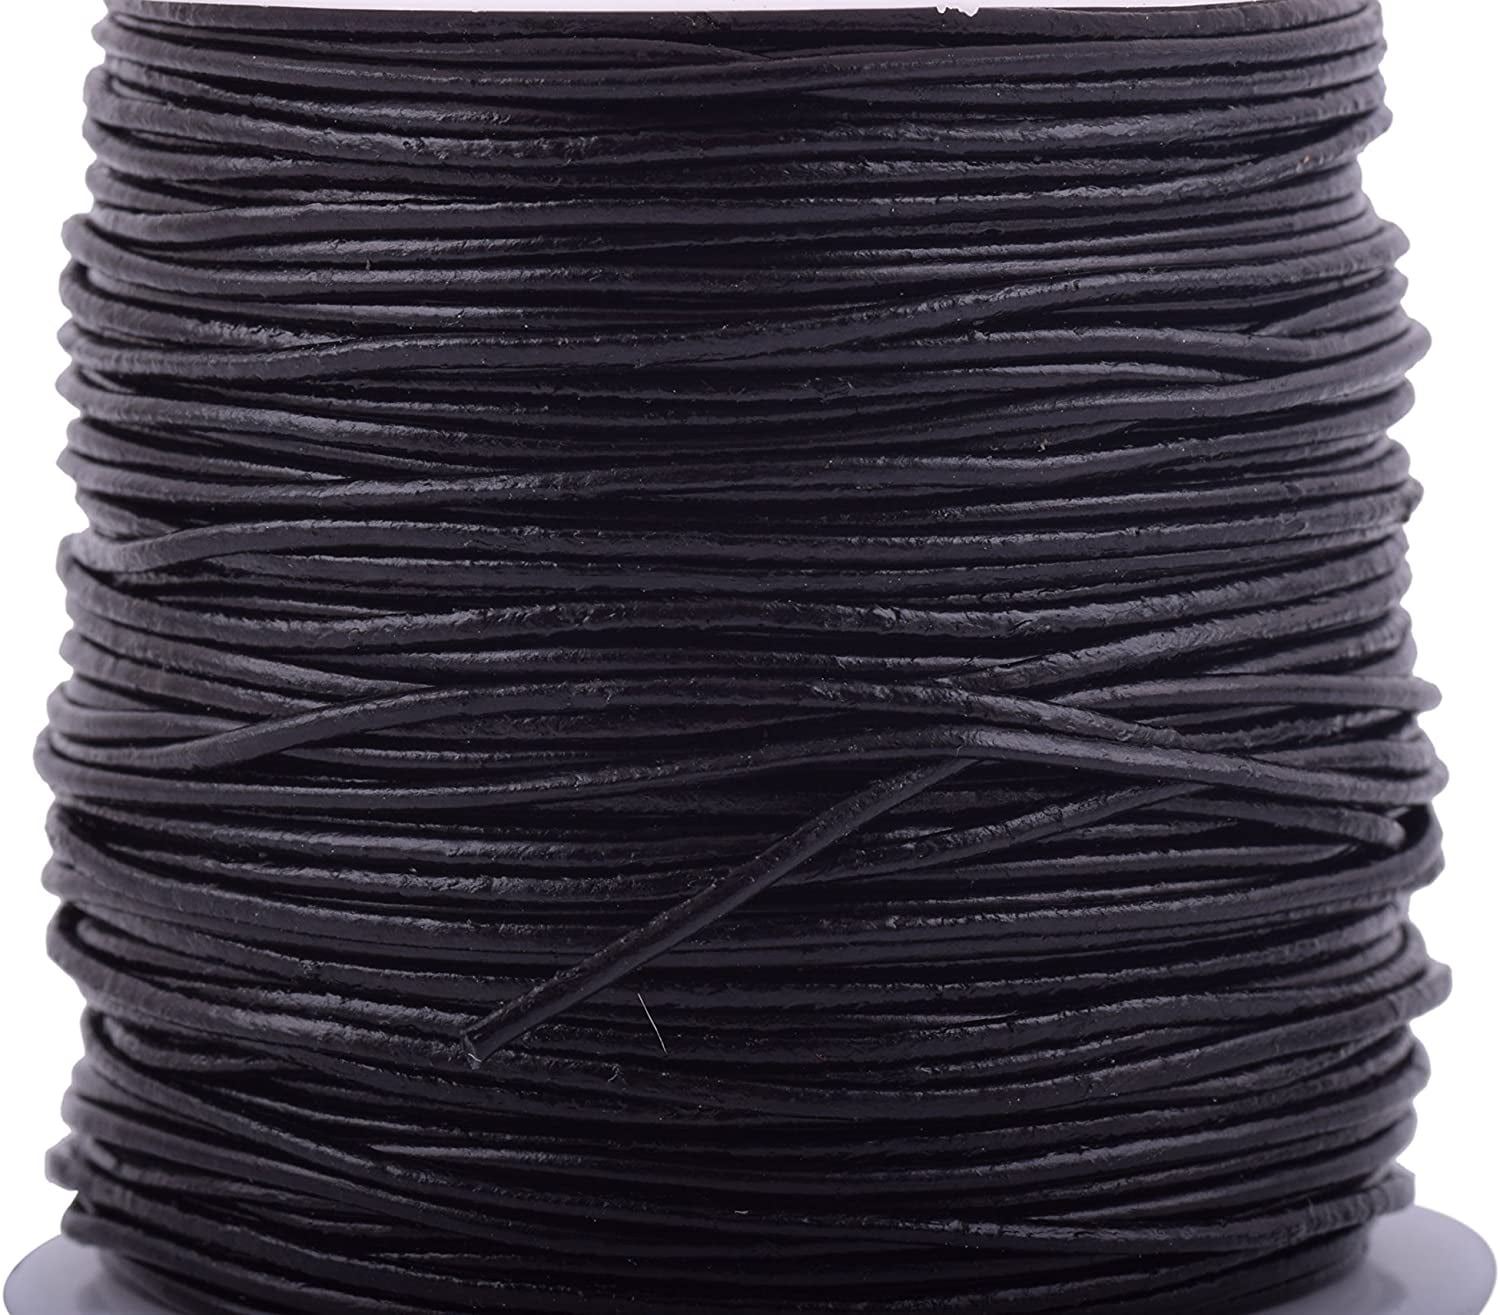 GENUINE BLACK ROUND LEATHER CORD 1MM 1.5MM 2MM 3MM 4MM 5MM 6MM 7MM 8MM 